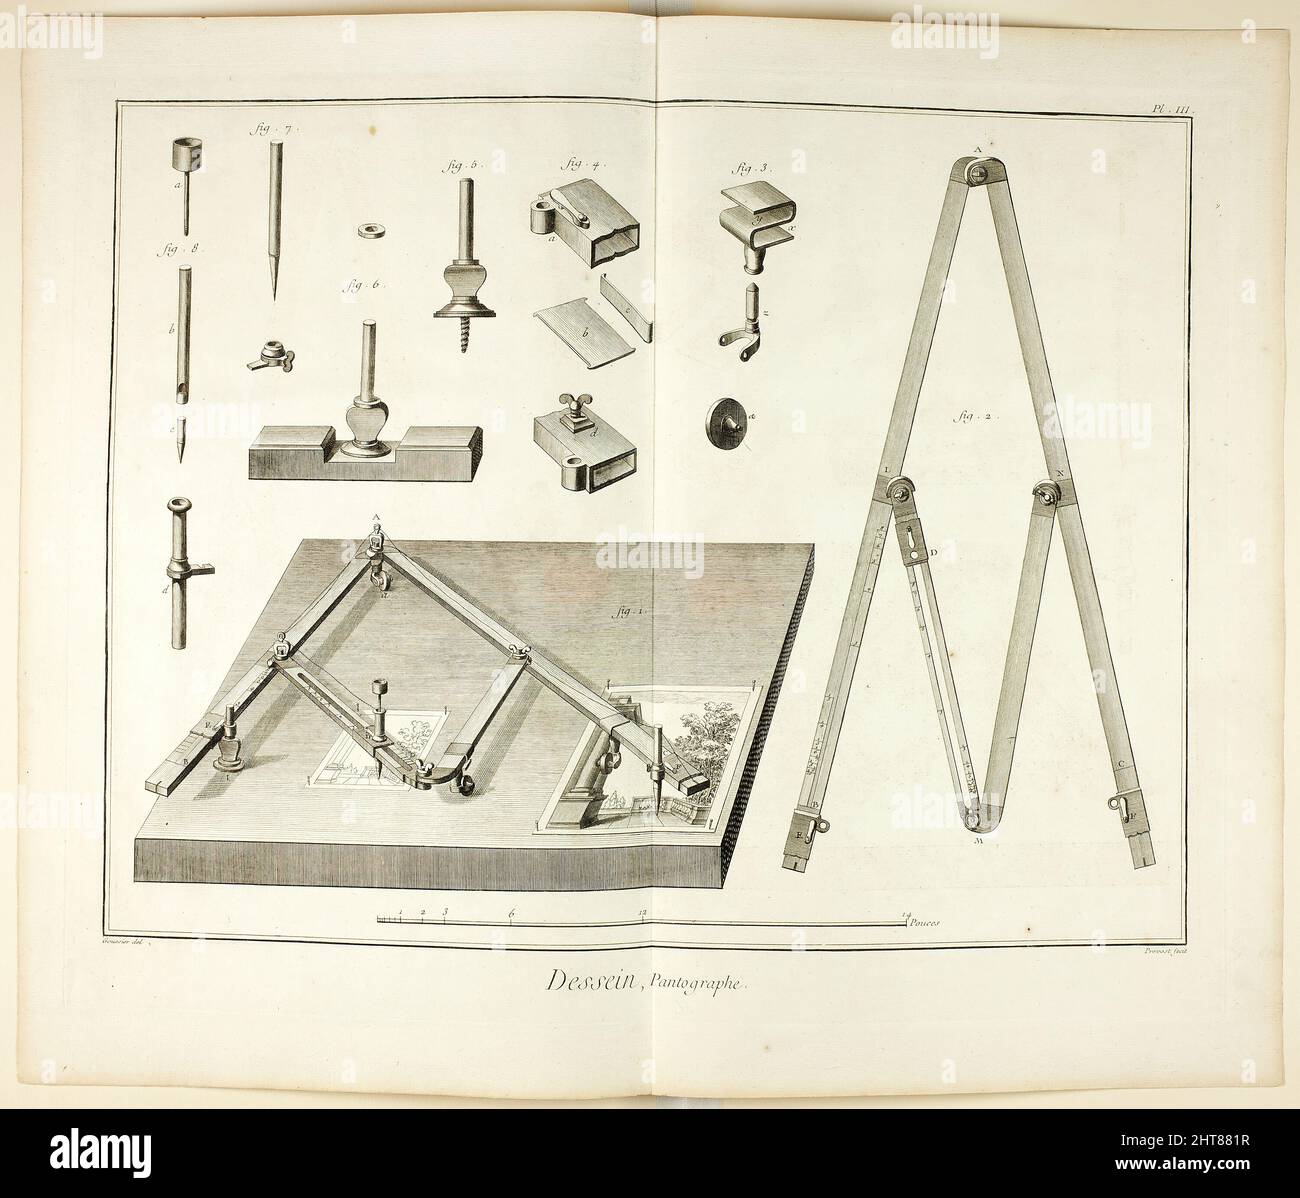 Pantograph for drawing (with drawings and manual).